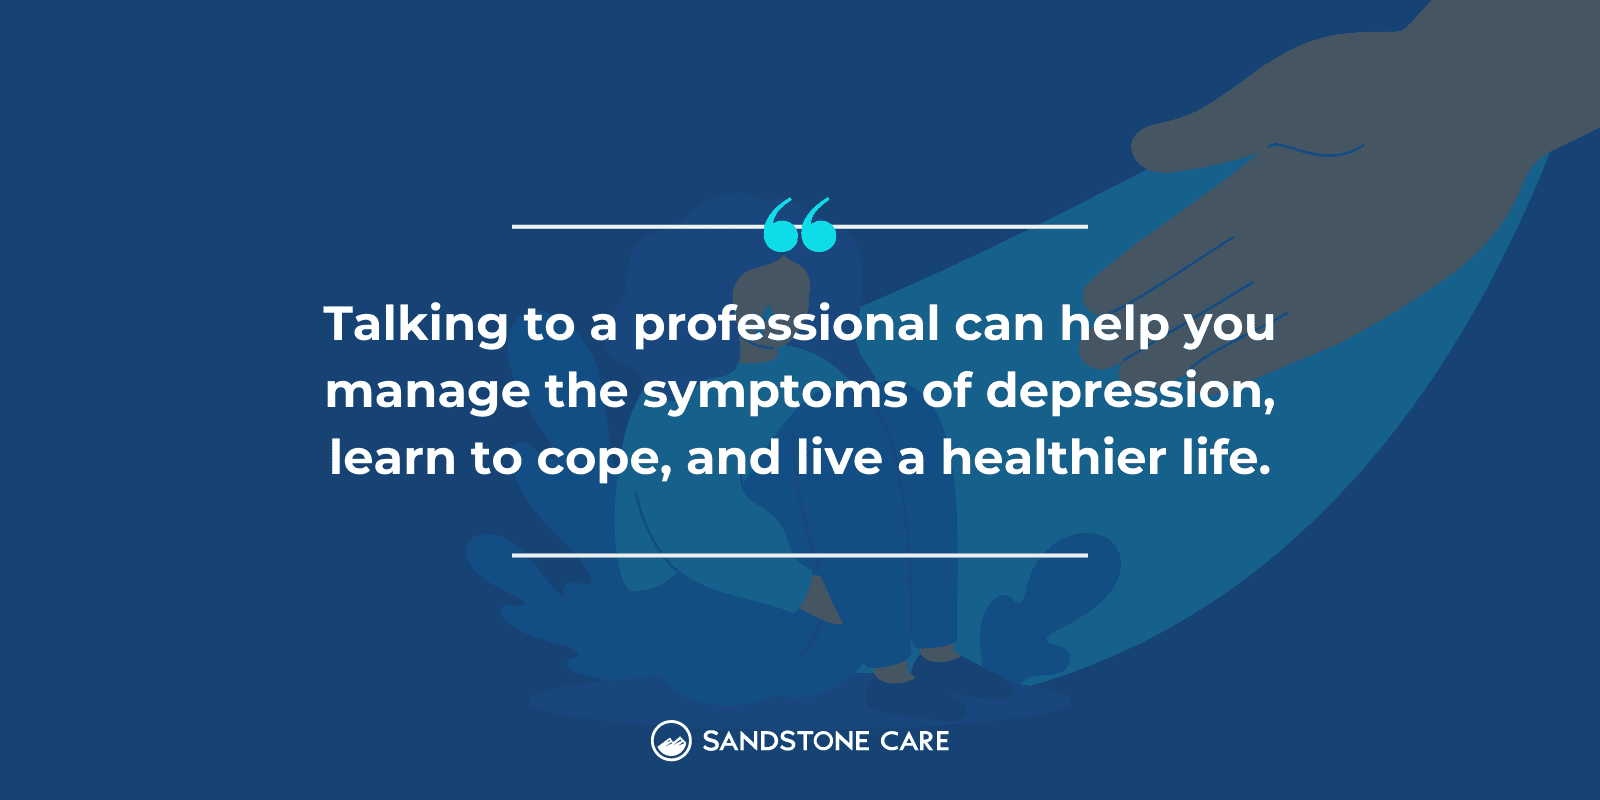 "Talking to a professional can help you manage the symptoms of depression, learn to cope, and live a healthier life." written on top of a graphic of helping hand